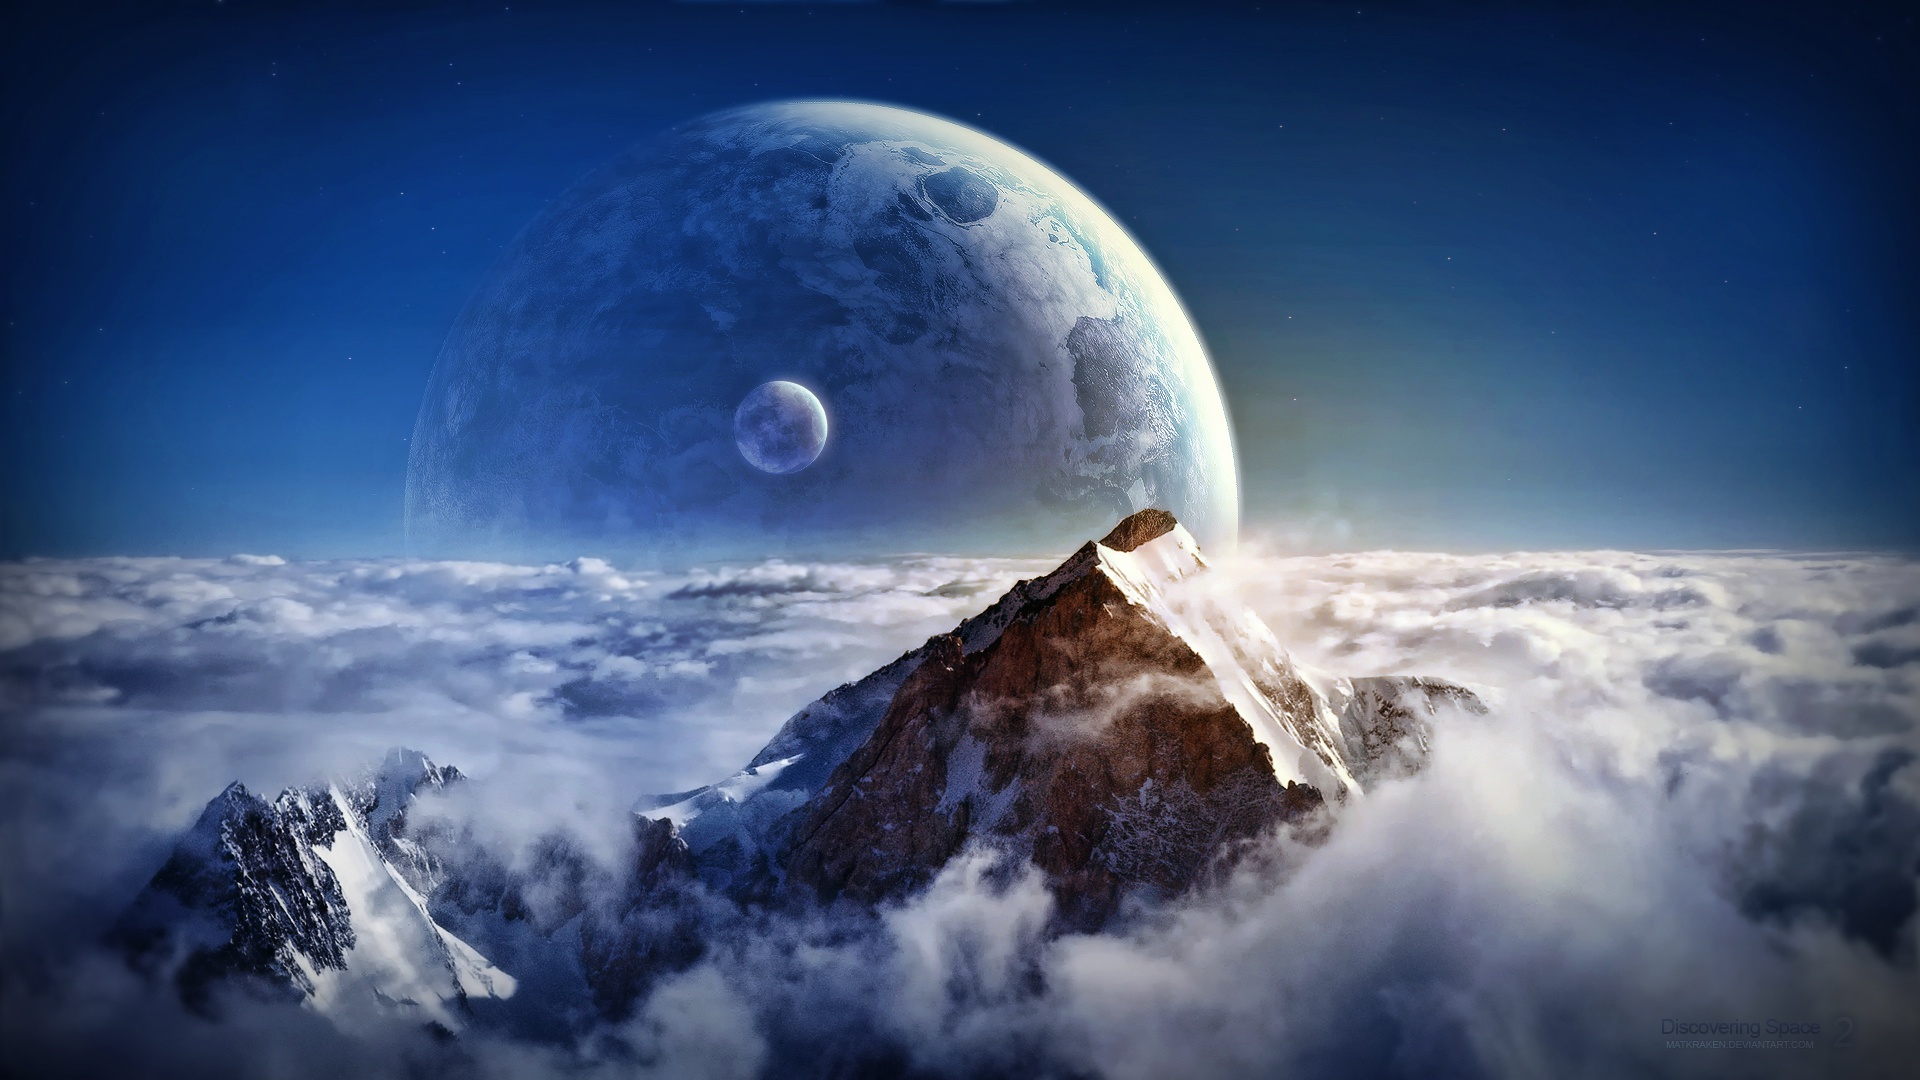 space hd wallpapers 1080p,atmosphere,nature,sky,moon,daytime